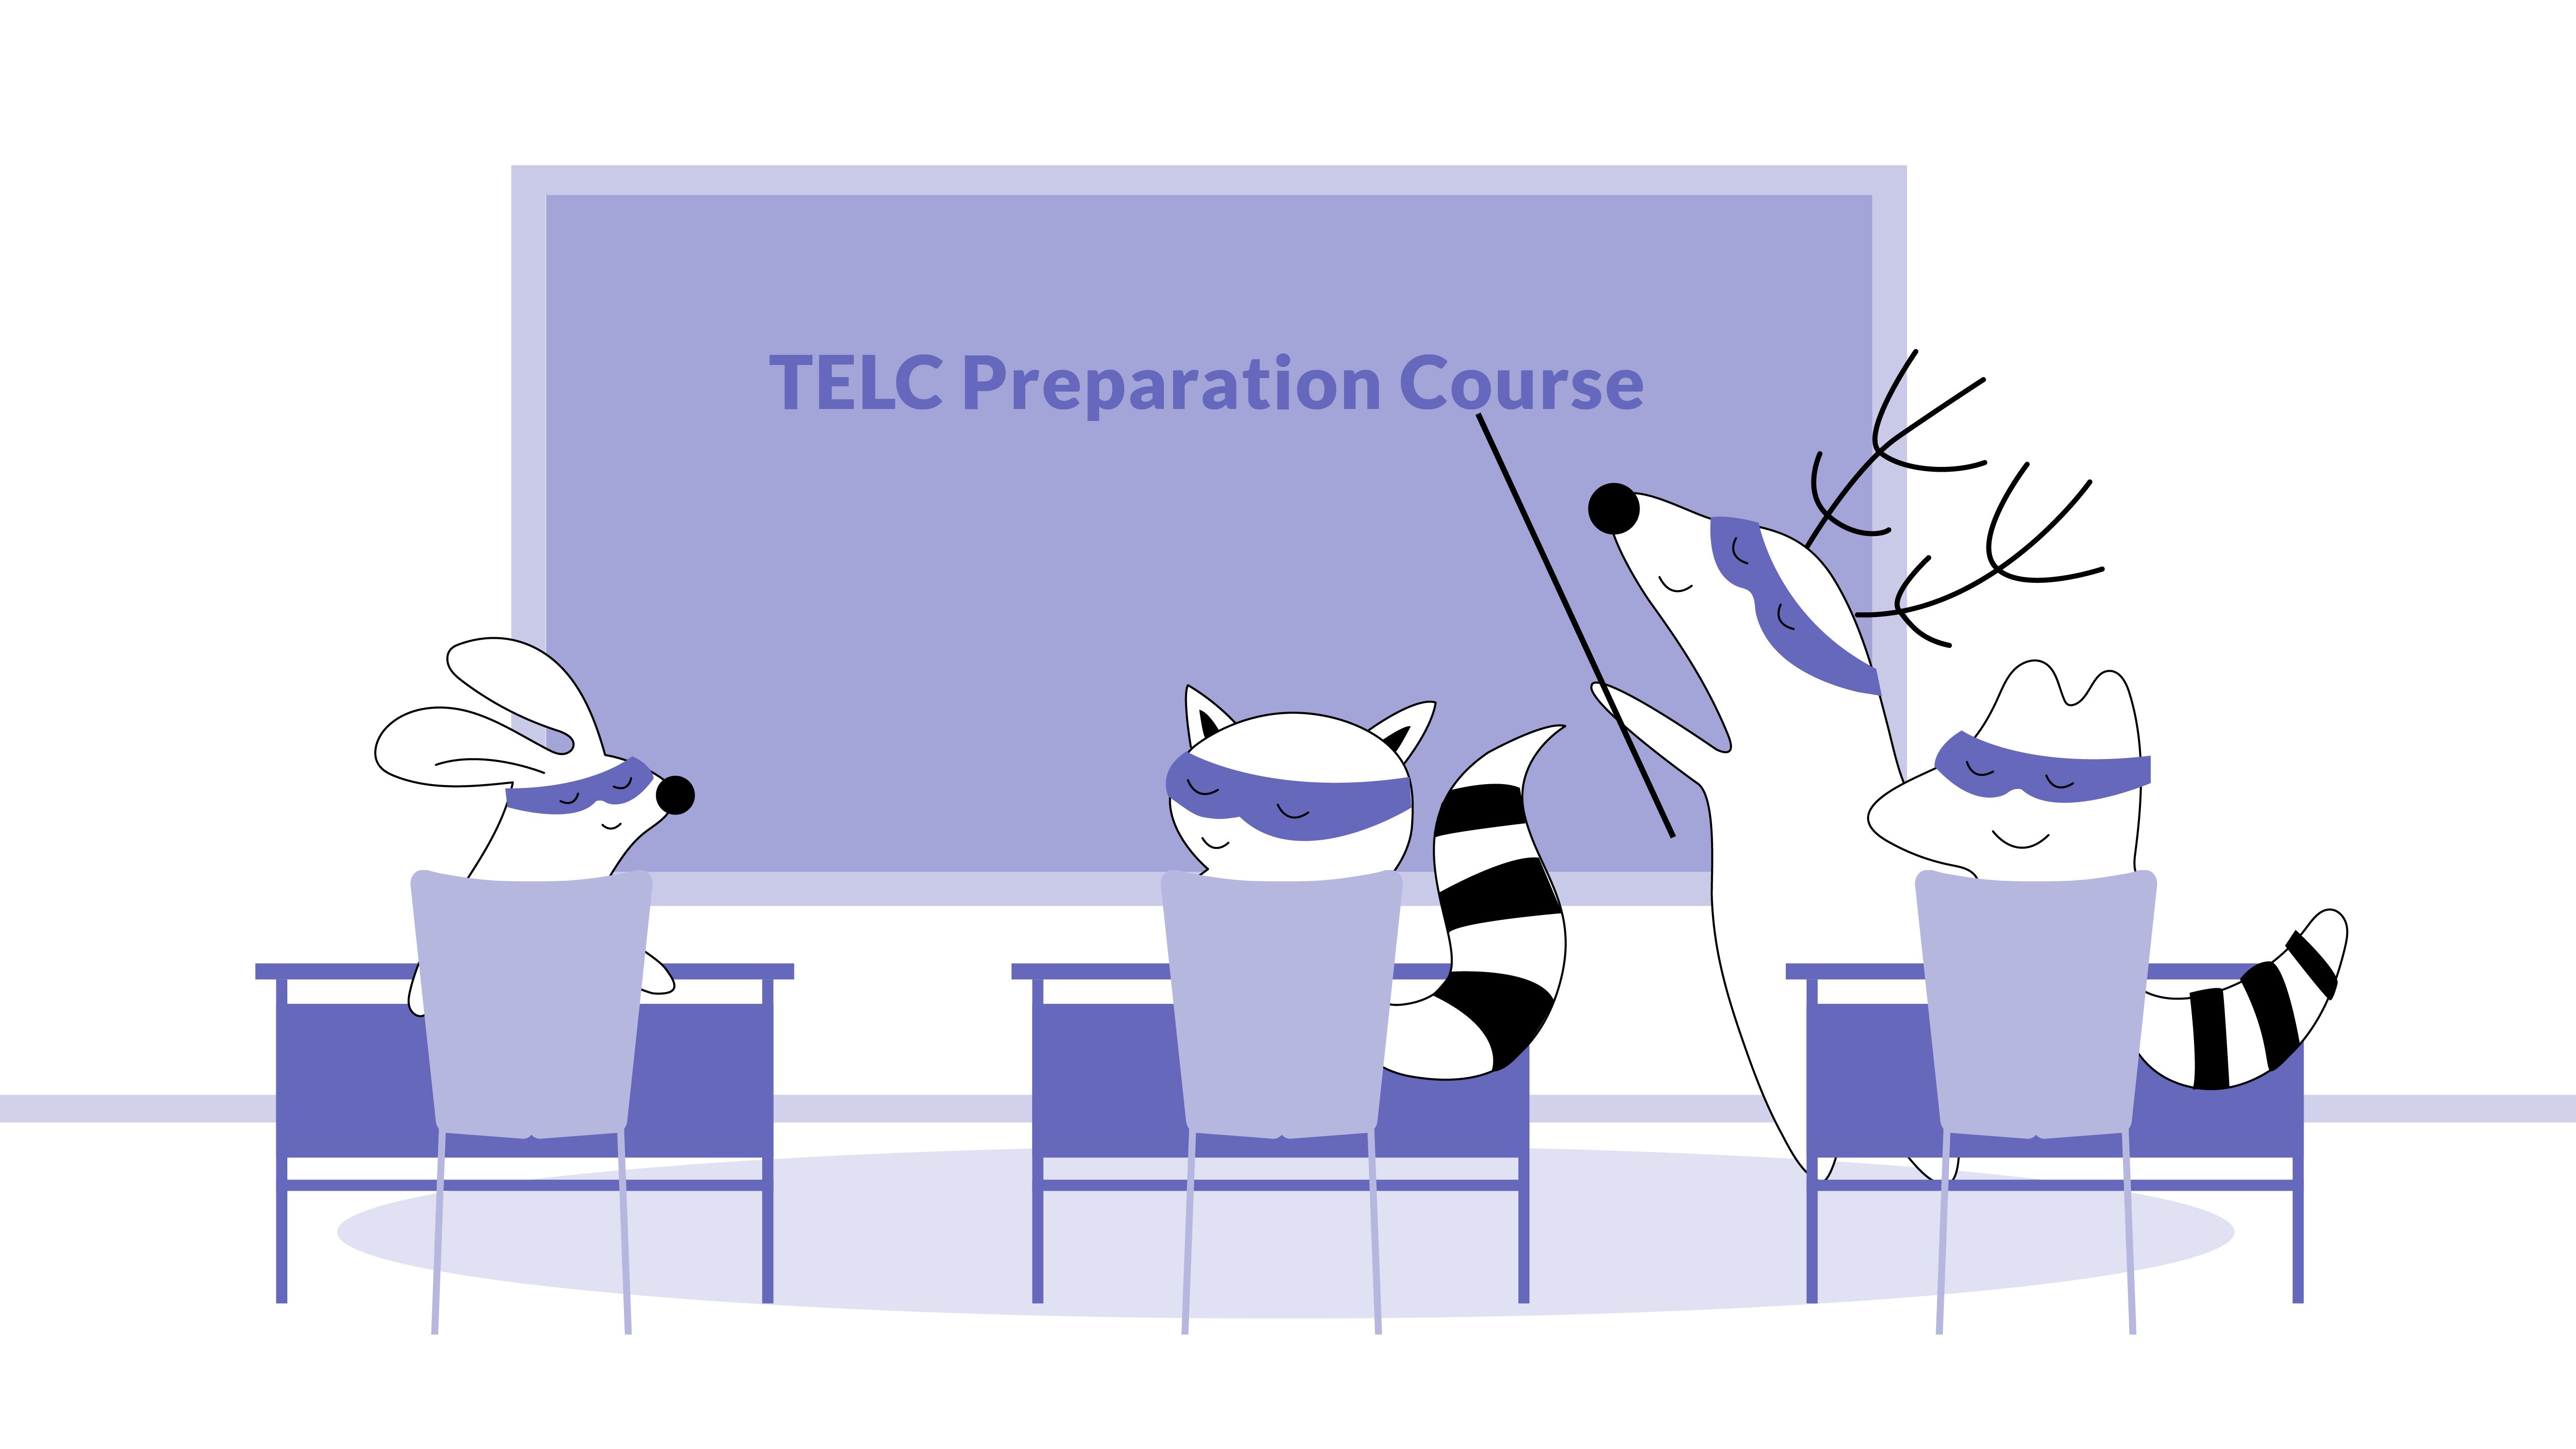 Benji attends German courses, joining Soren, Iggy, and Pocky. They are in the classroom with the “TELC Preparation Course” written on the blackboard.